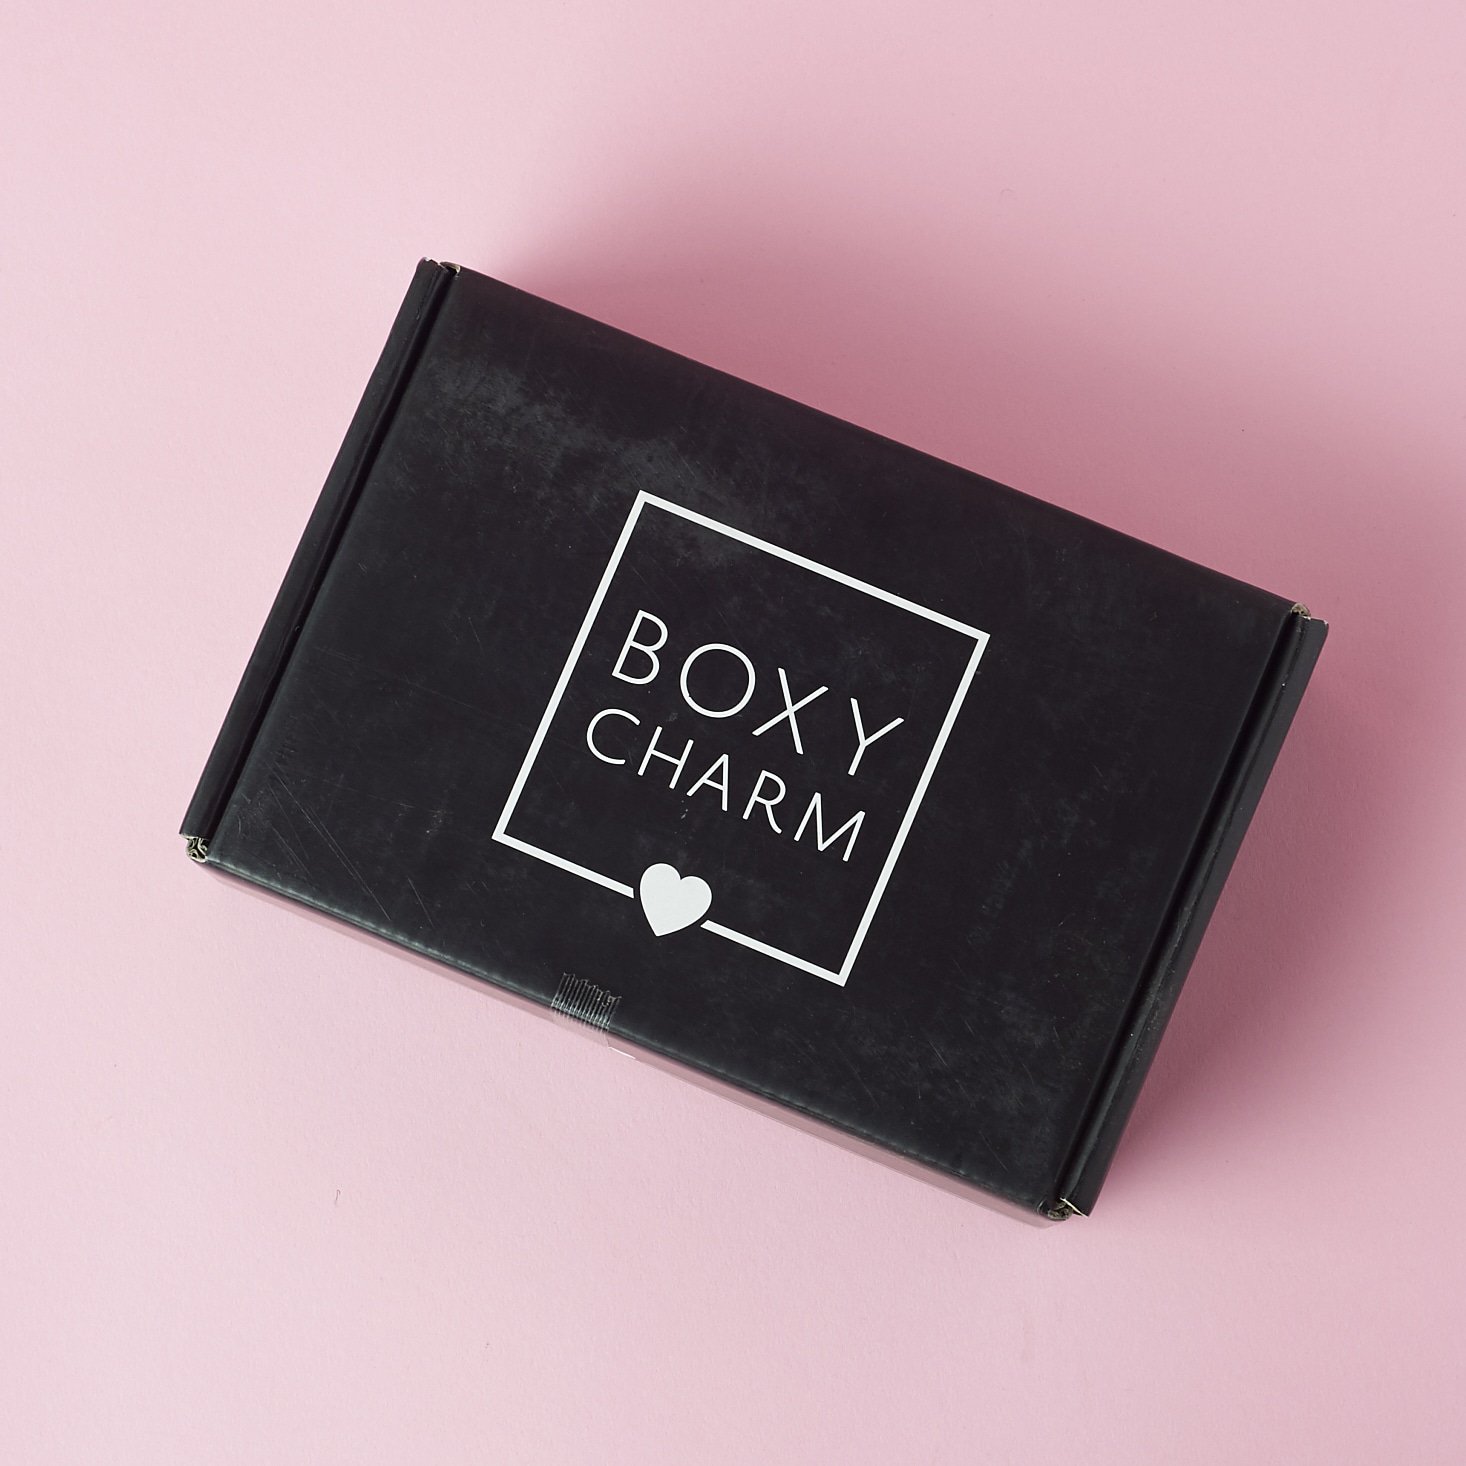 BoxyCharm Pricing Update: What You Need to Know